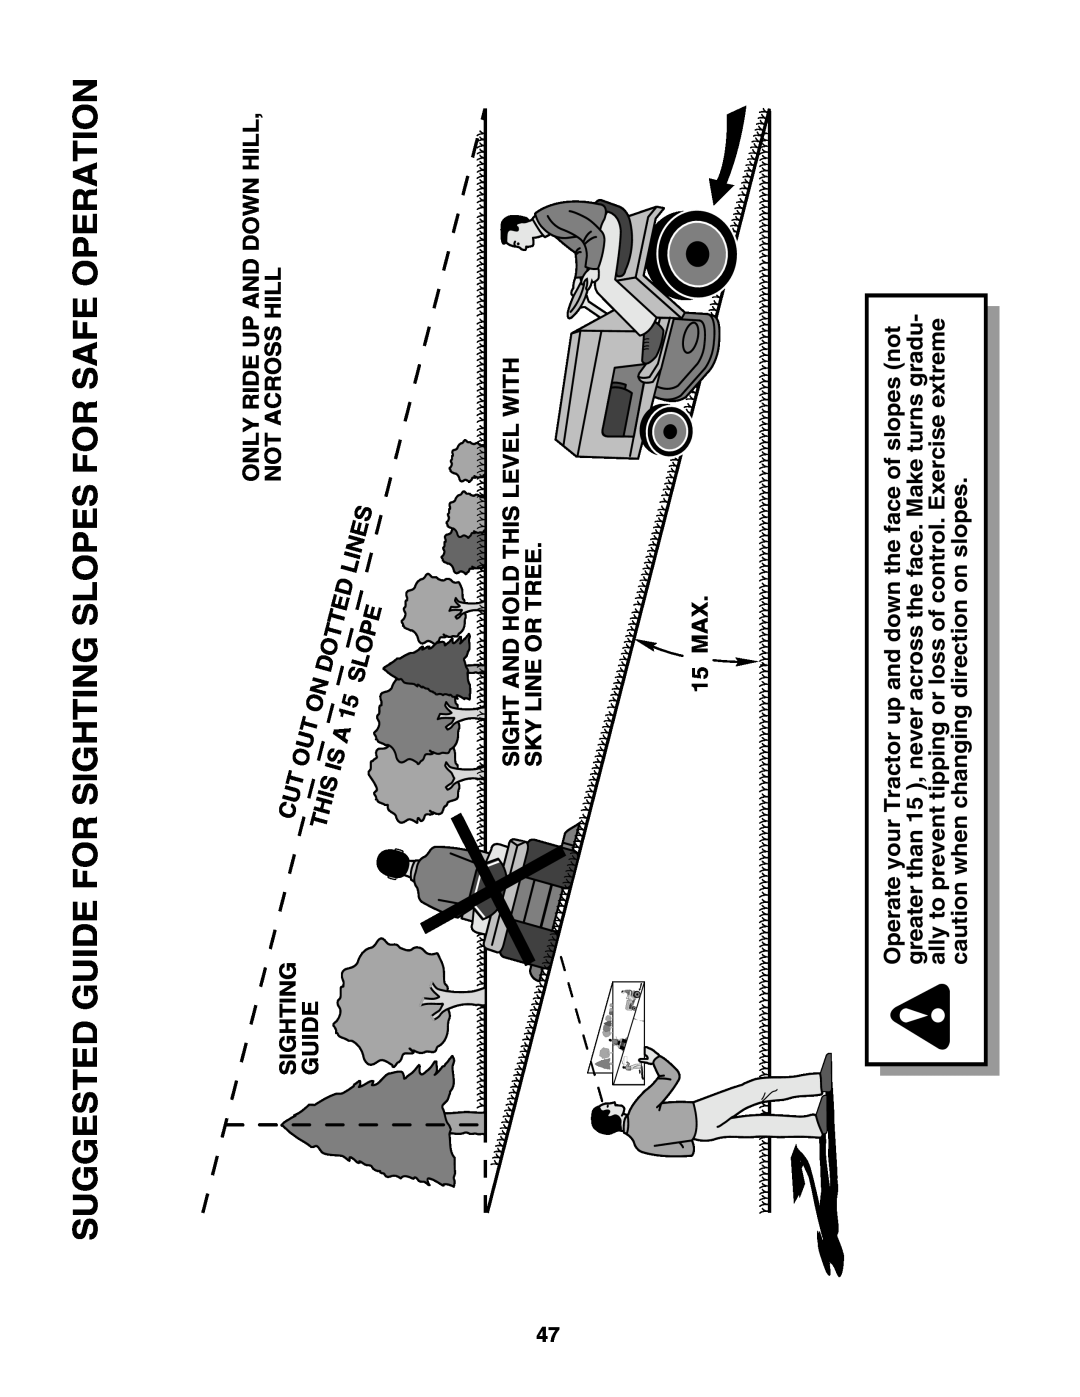 Weed Eater 180530 manual Suggested Guide For Sighting Slopes For Safe Operation 